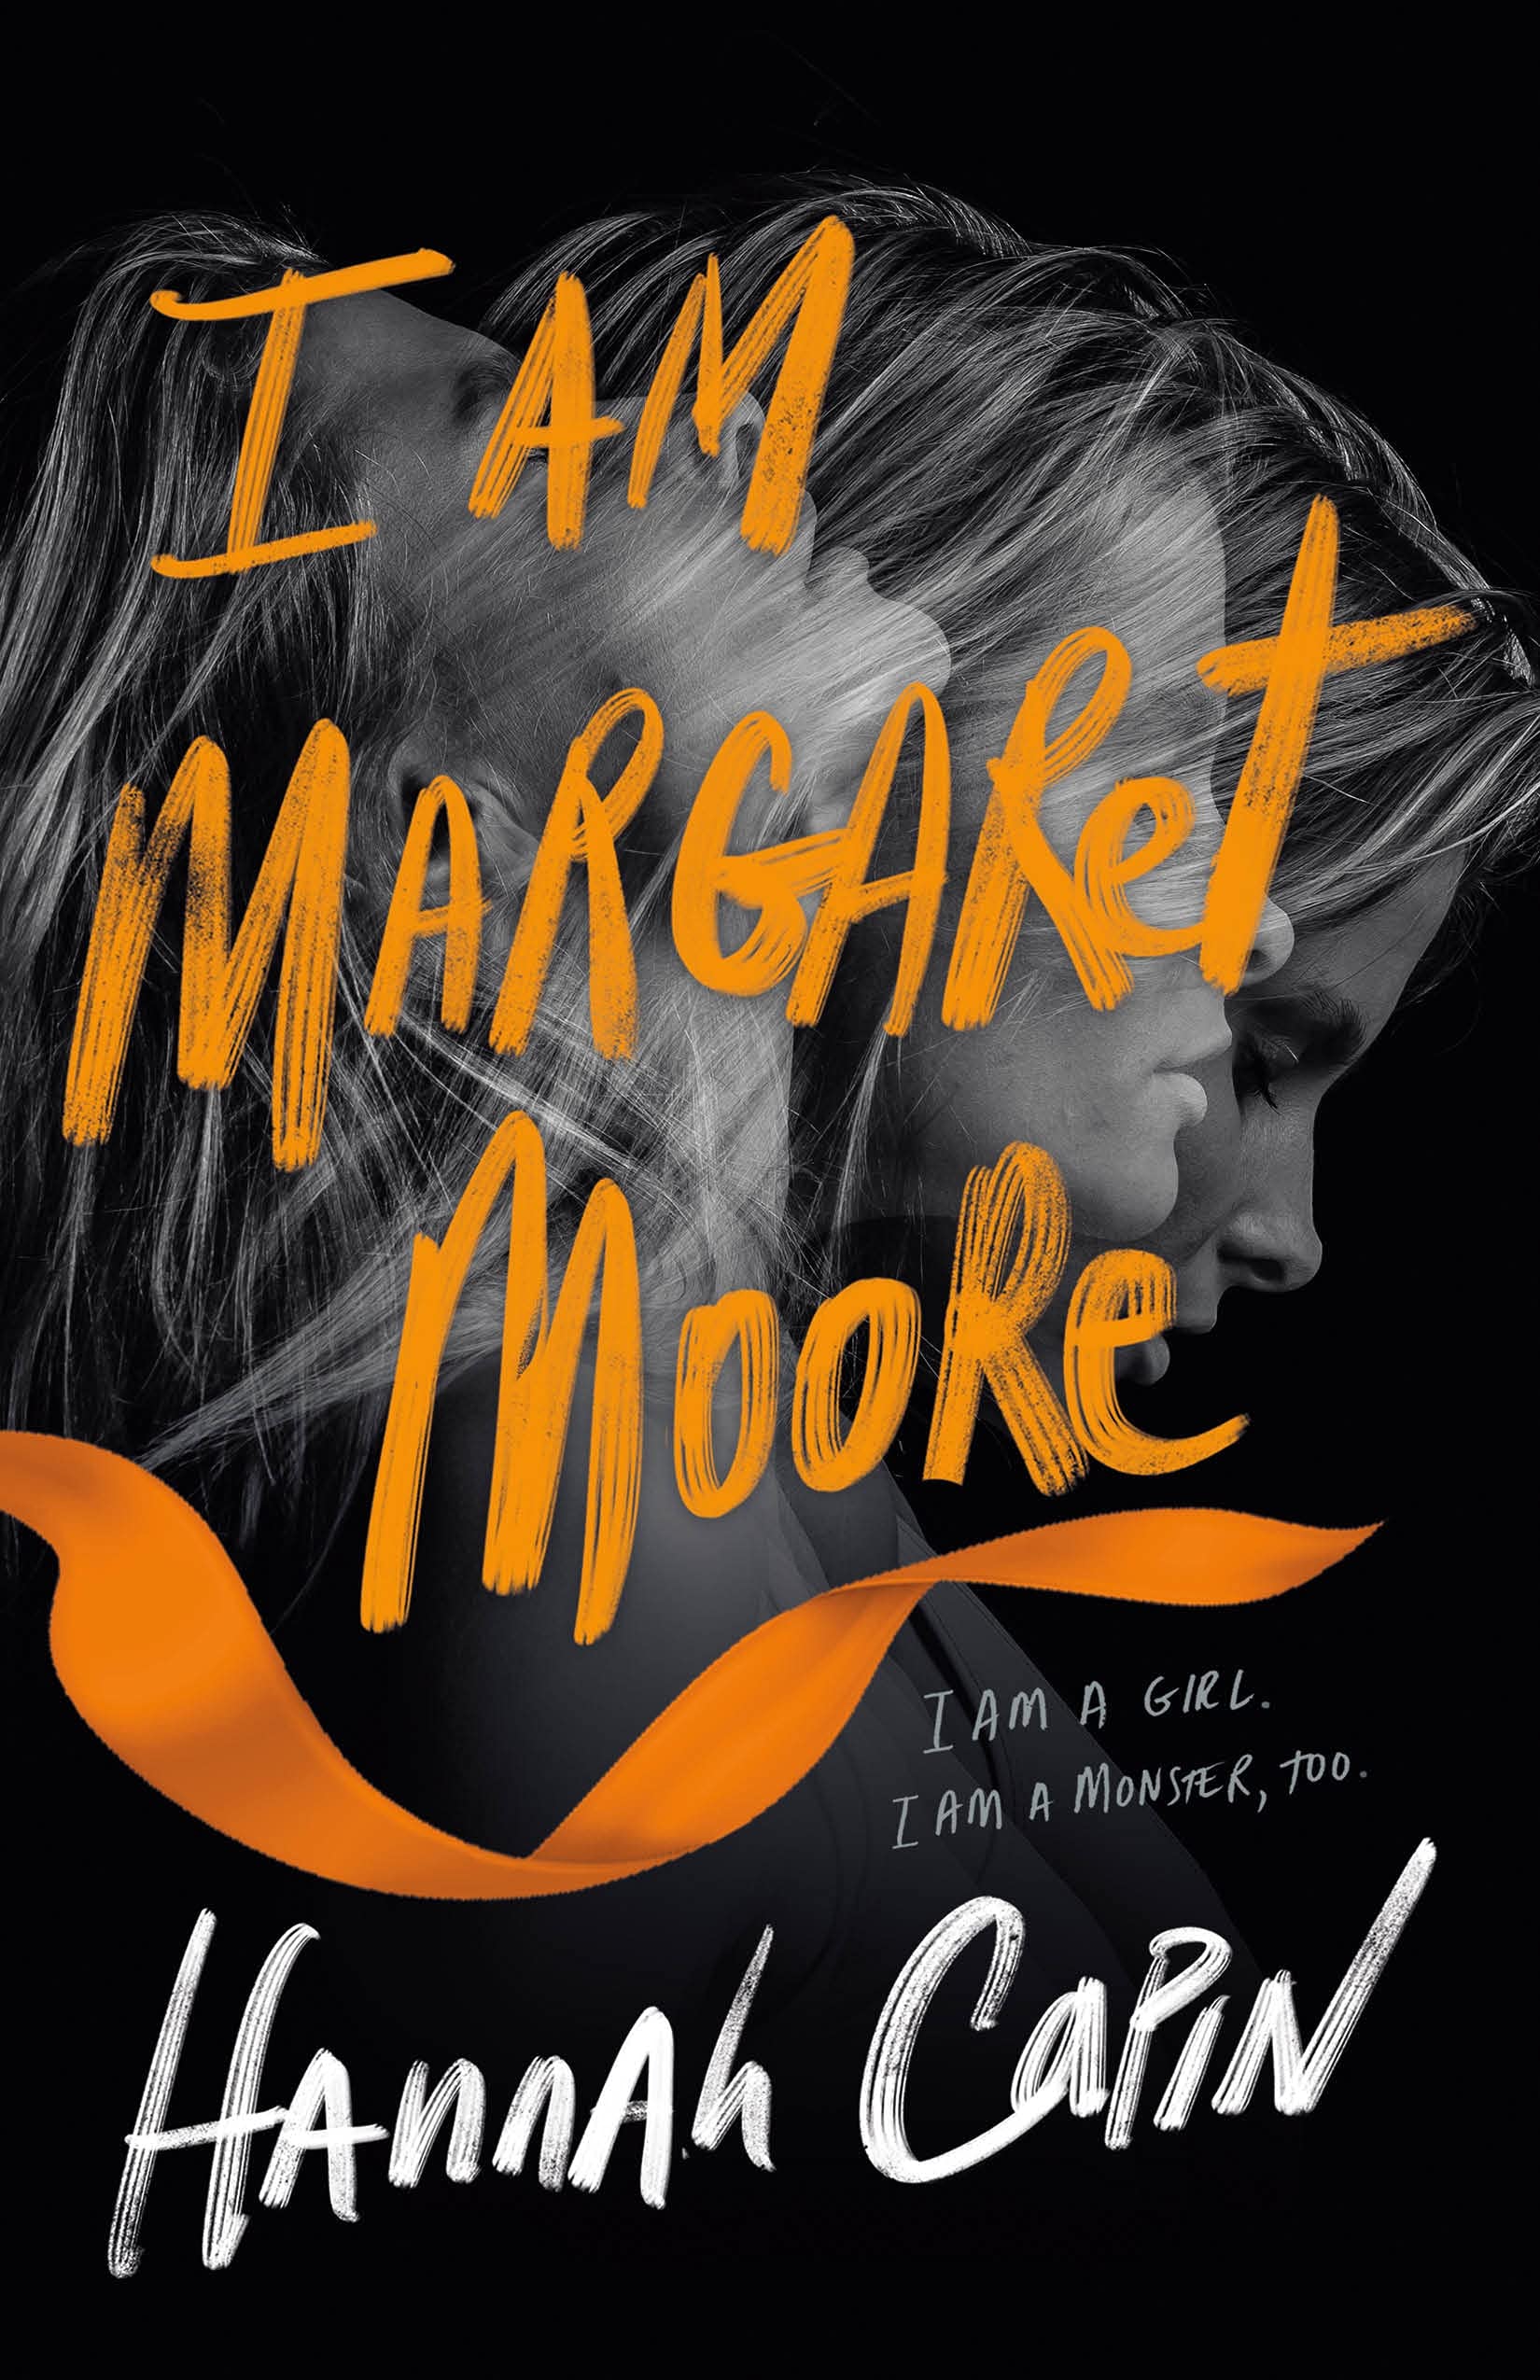 Cover of “I Am Margaret Moore” by Hannah Capin